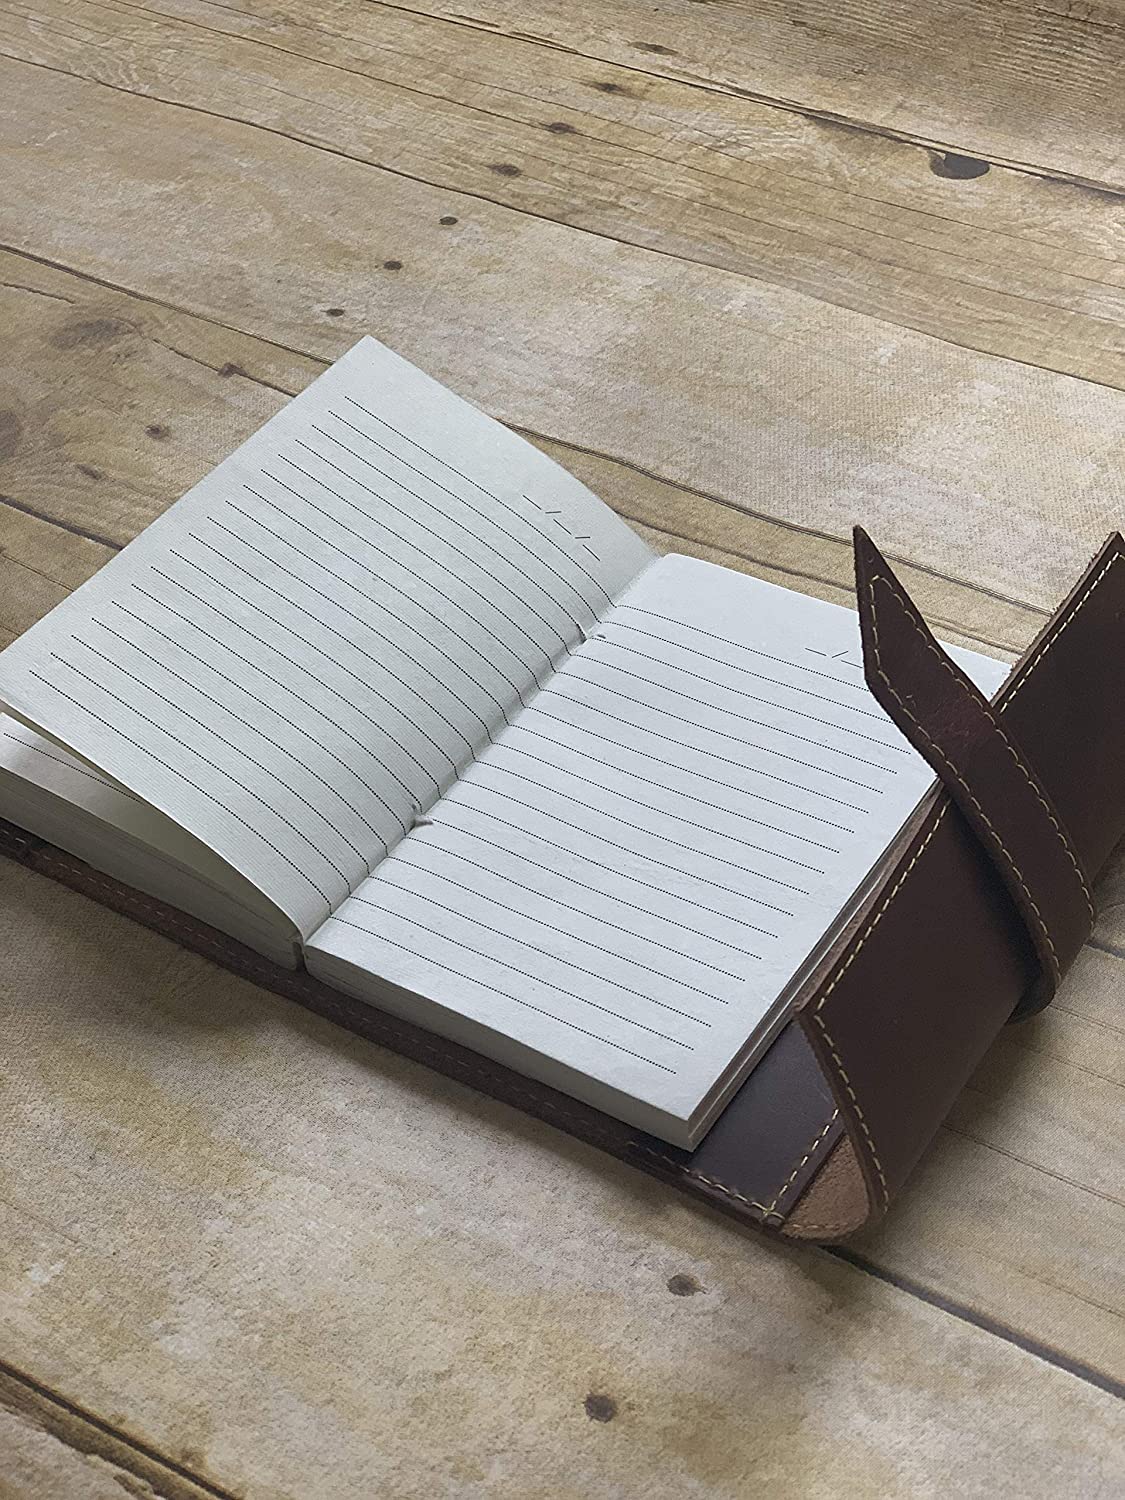 Tuk Tuk Press® Handmade Lined Leather Journal, 200 Refillable Lined Pages, Recycled Cotton Tree and Acid Free Paper